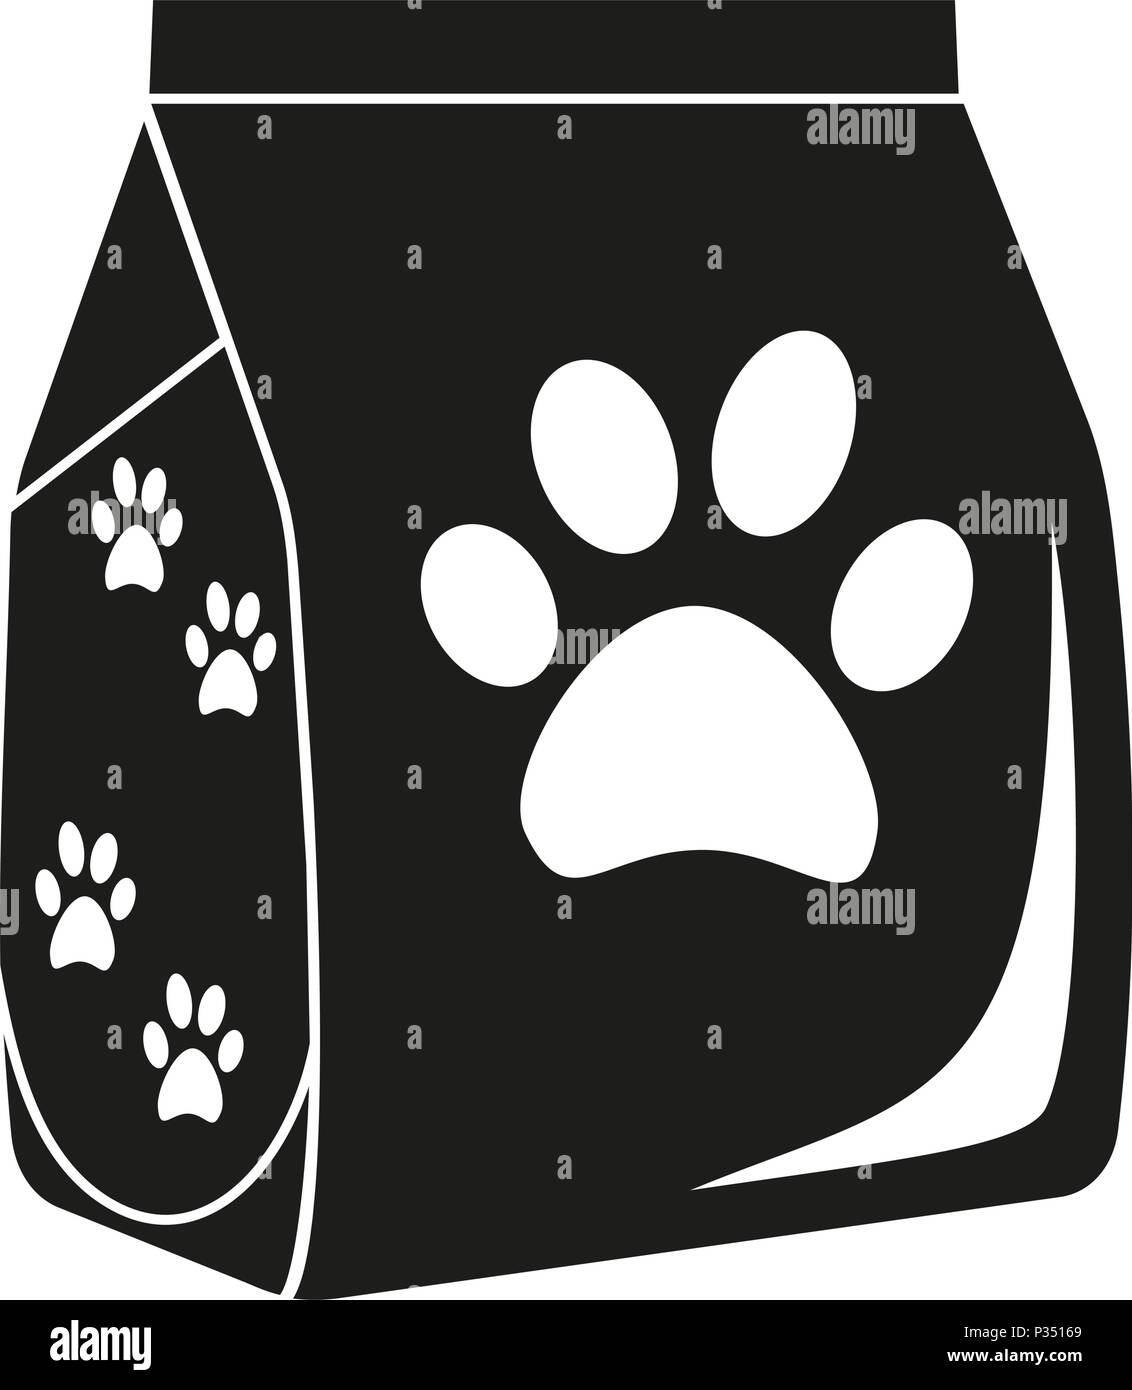 Black and white dry cat food bag silhouette Stock Vector